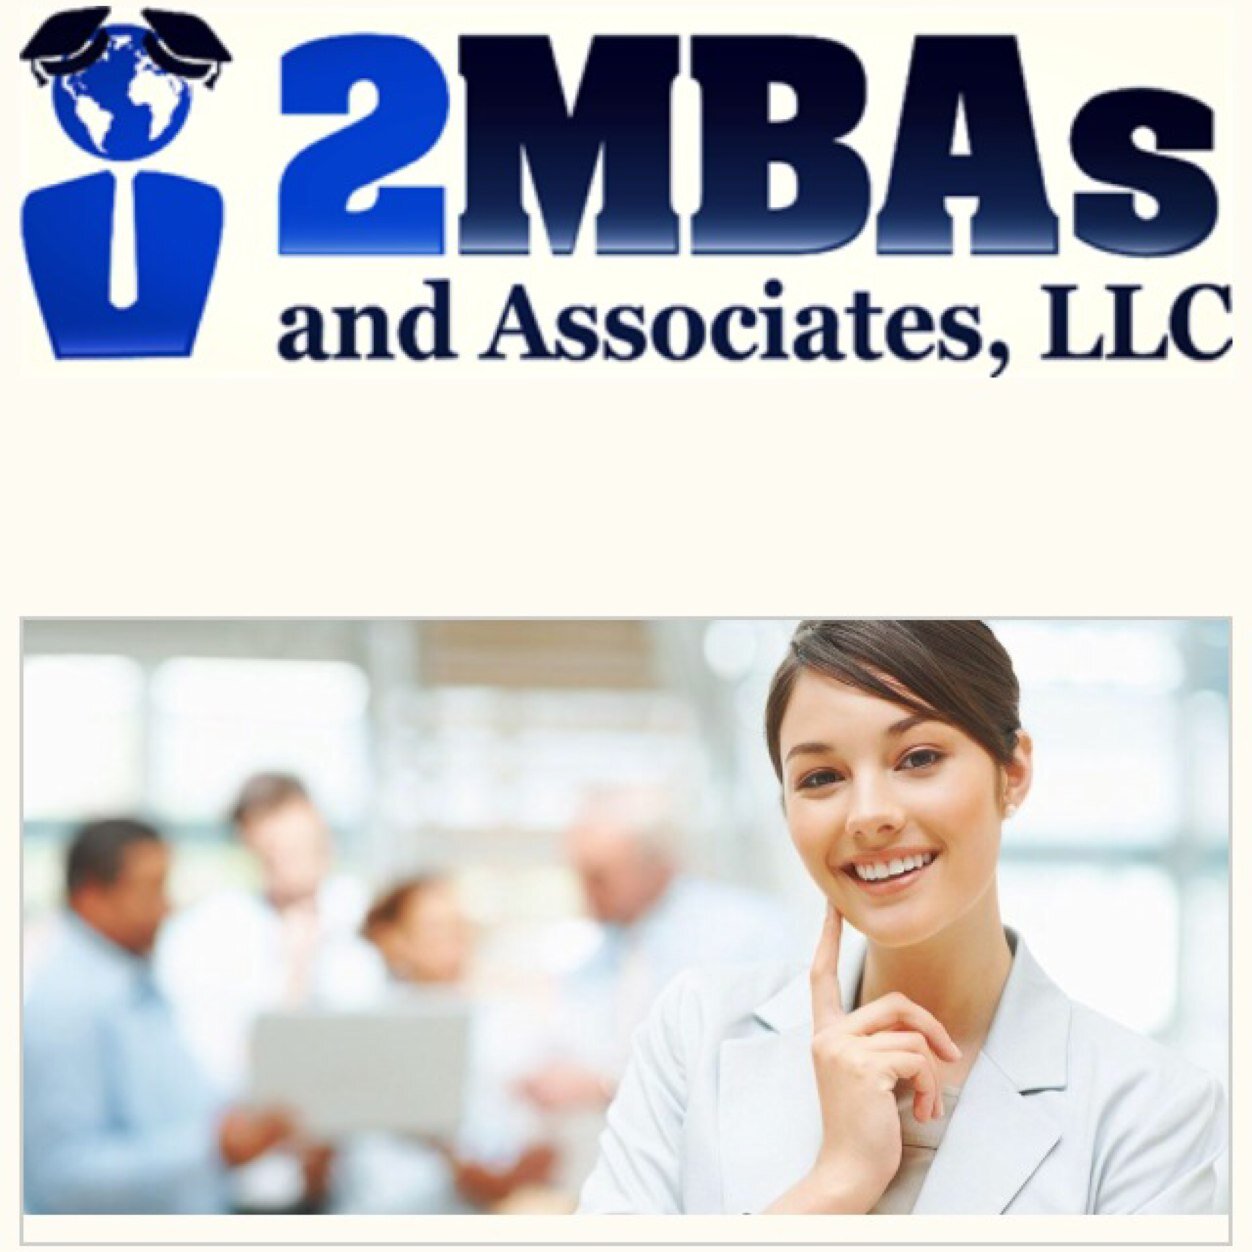 2MBAs and Associates, LLC is a global consulting firm specializing in bringing senior executive management and training techniques to businesses in need.